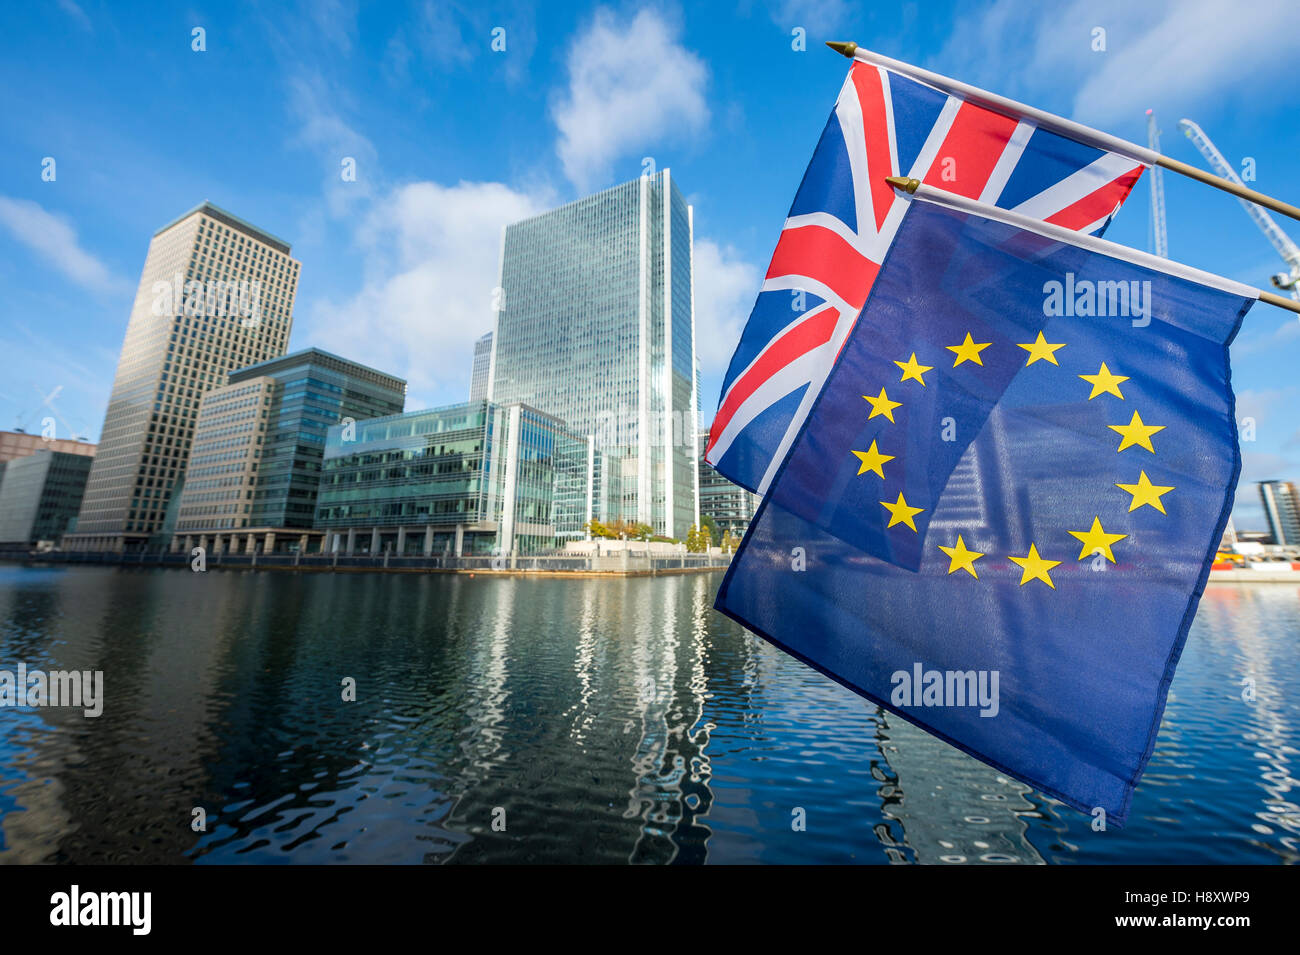 European Union and Union Jack flags flying above modern business towers of the financial center of Canary Wharf in London UK Stock Photo